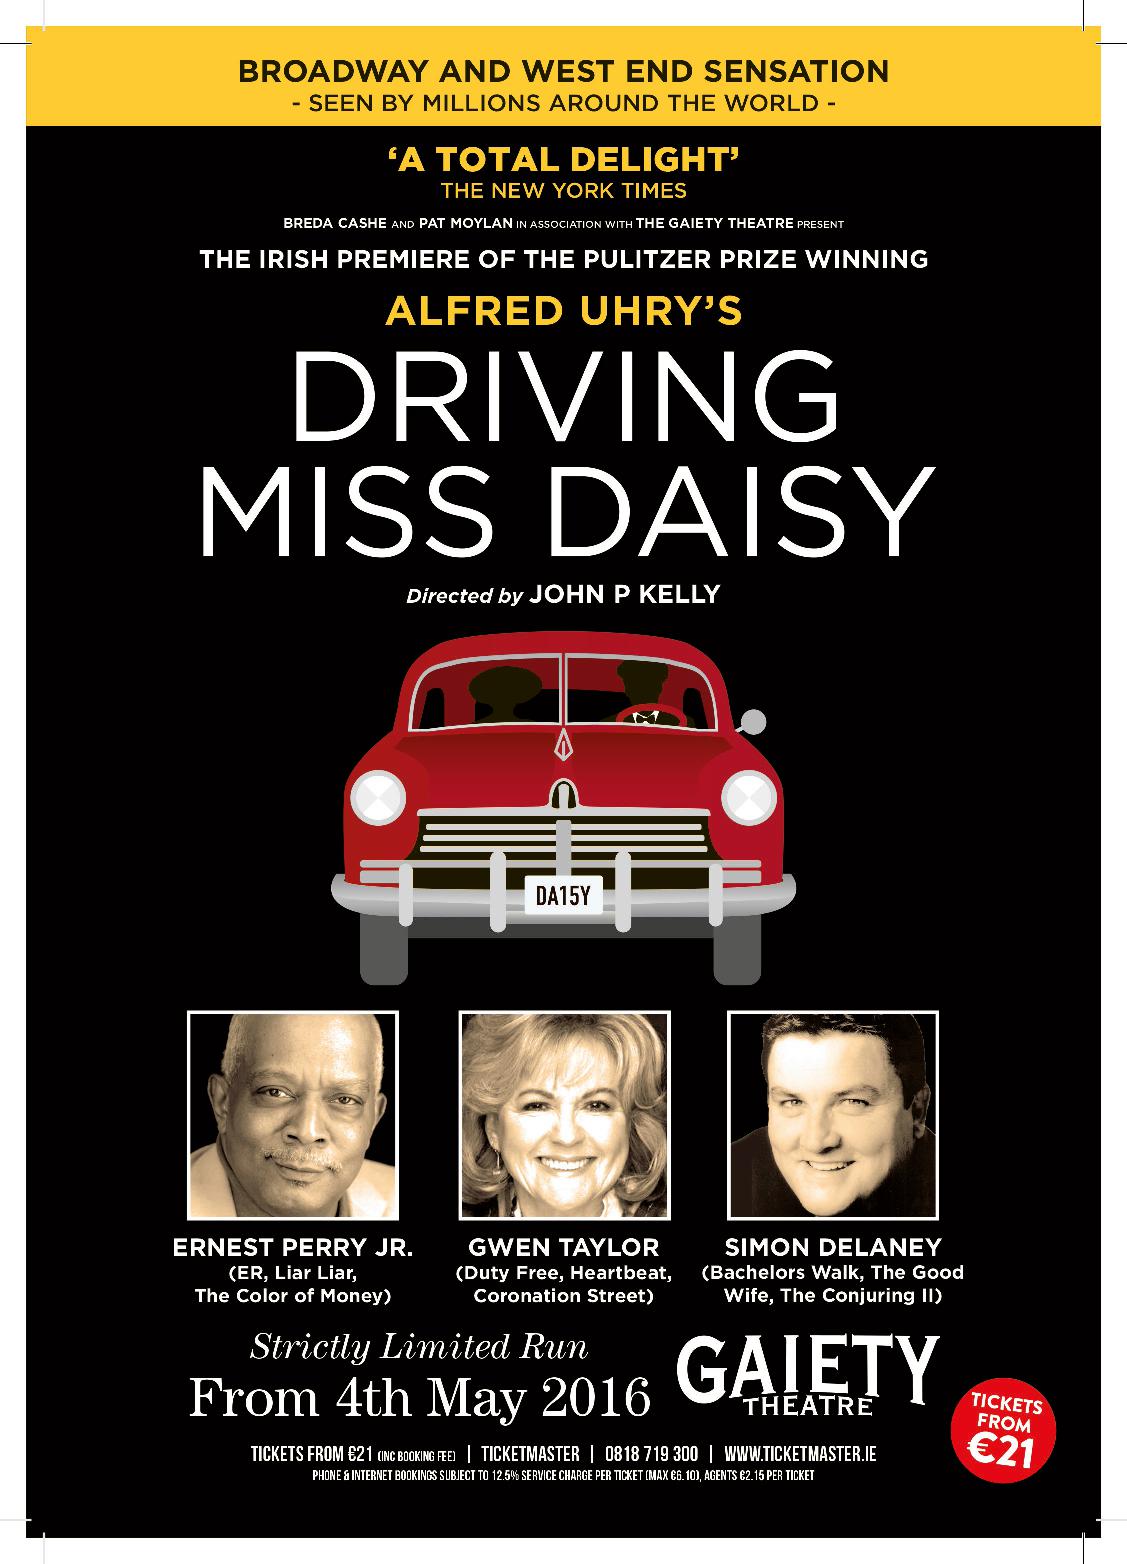 Driving miss daisy gaiety theatre 